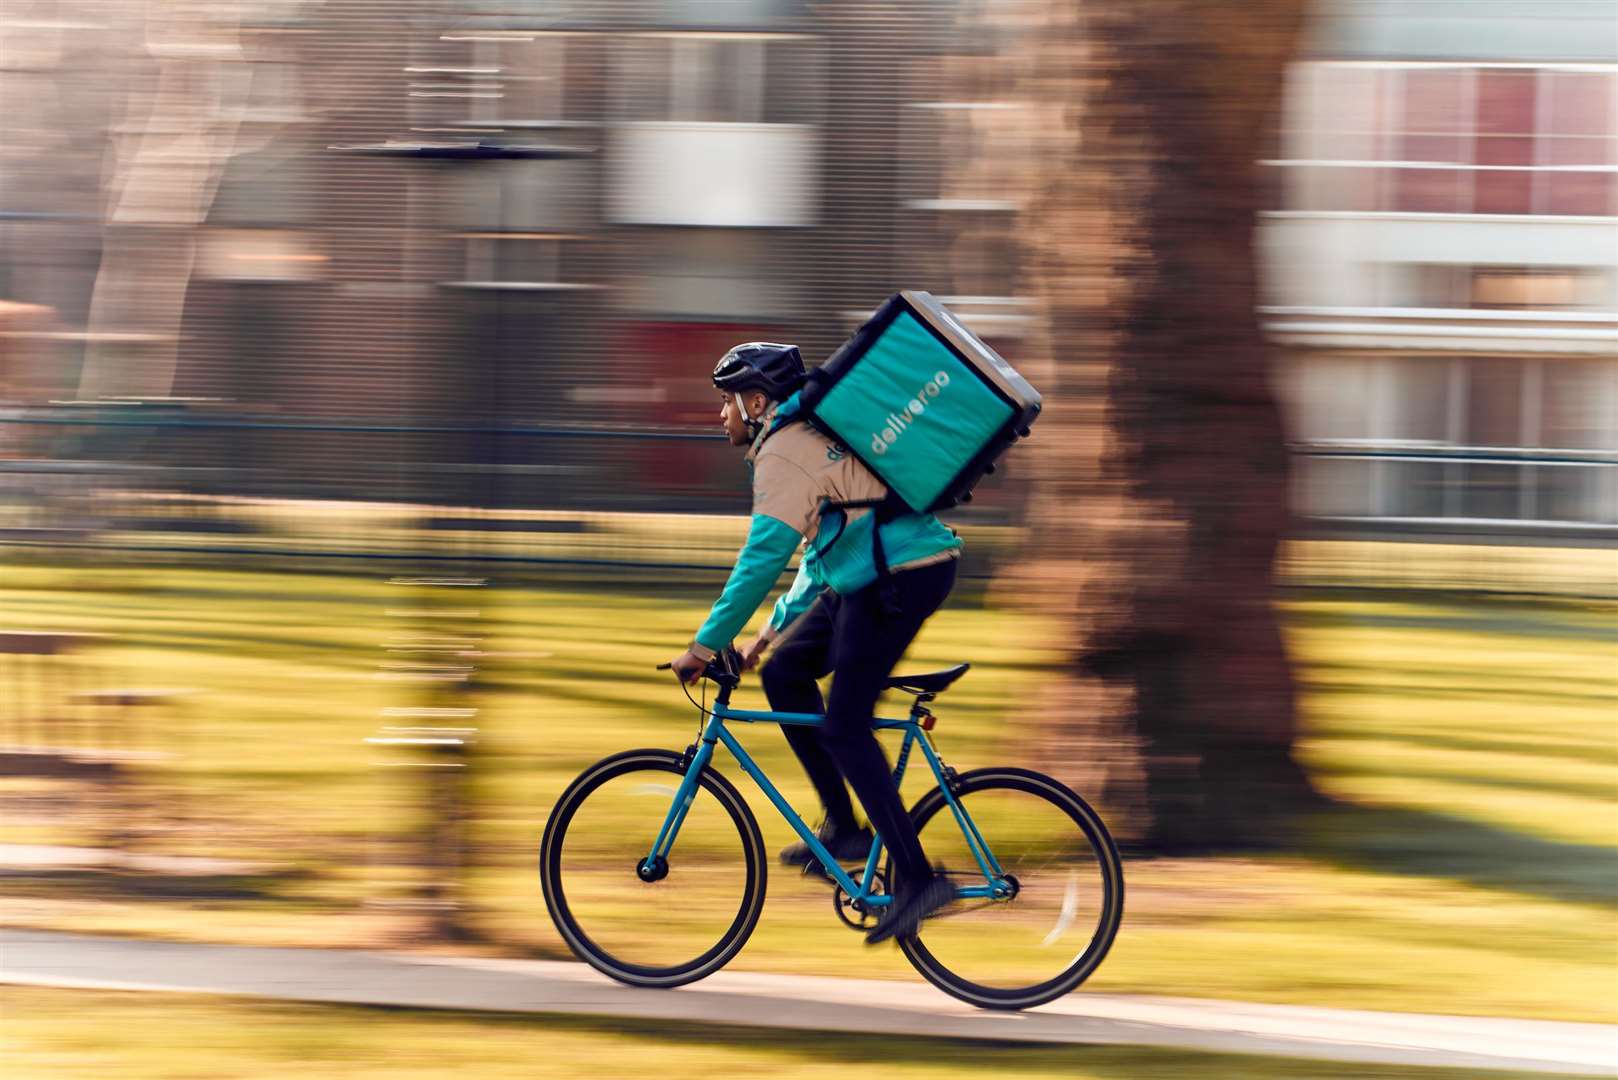 Deliveroo riders are a common sight due to the boom in popularity